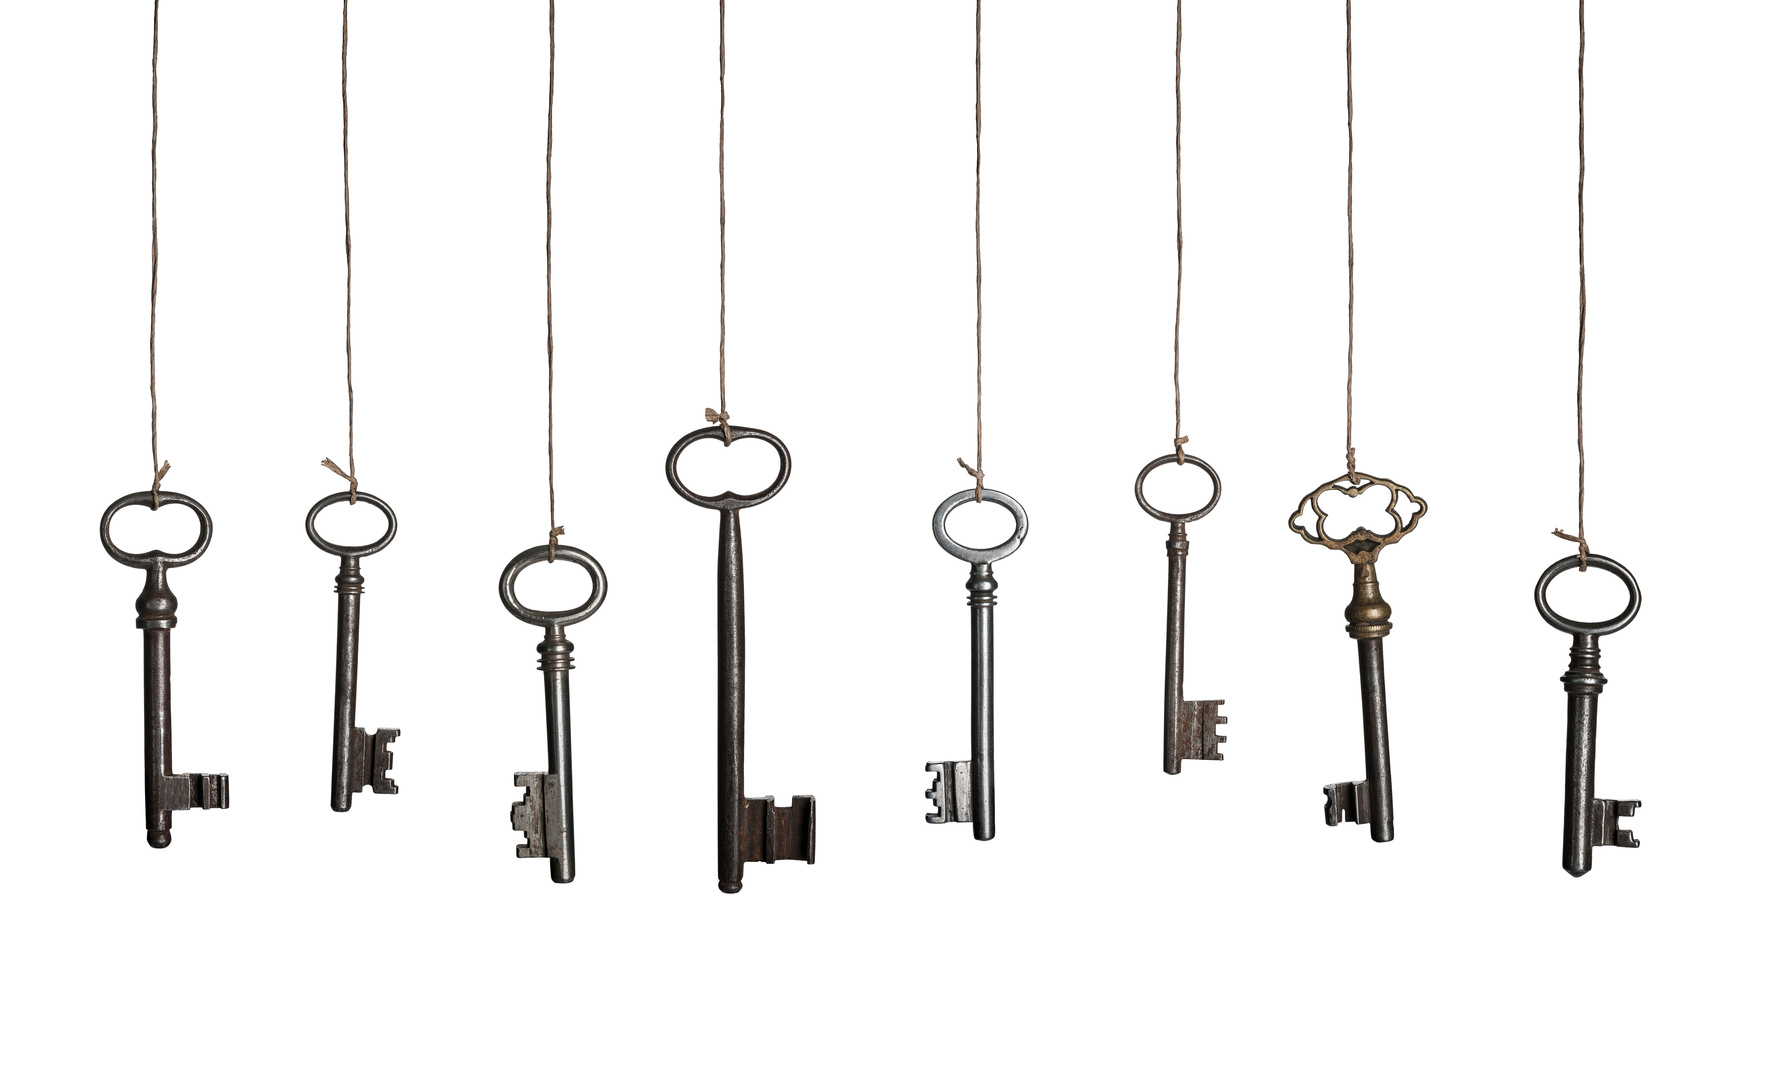 Picture of keys hanging on strings